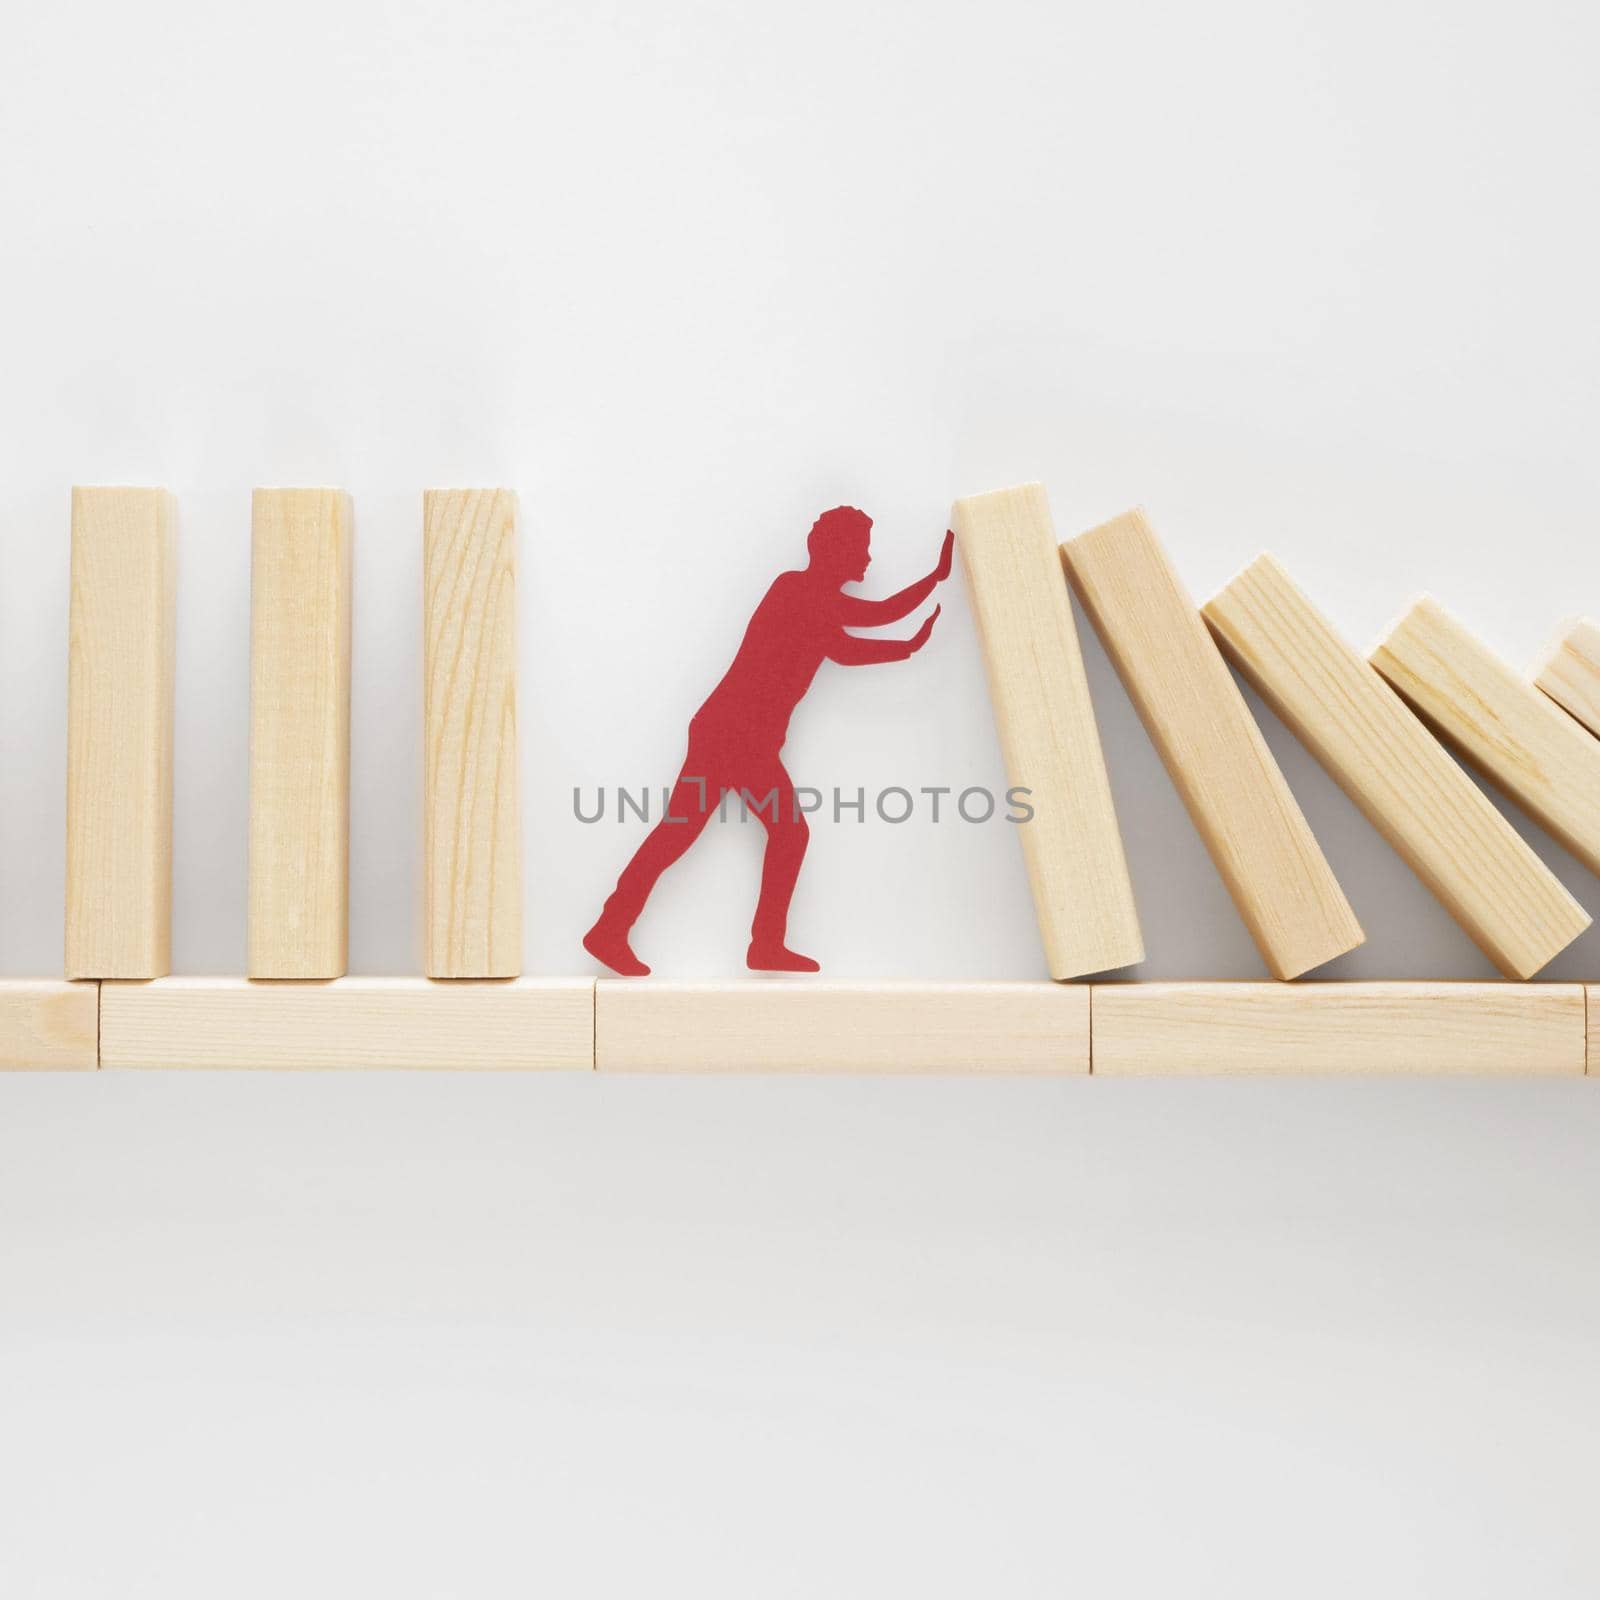 abstract representation financial crisis with wooden pieces. Resolution and high quality beautiful photo